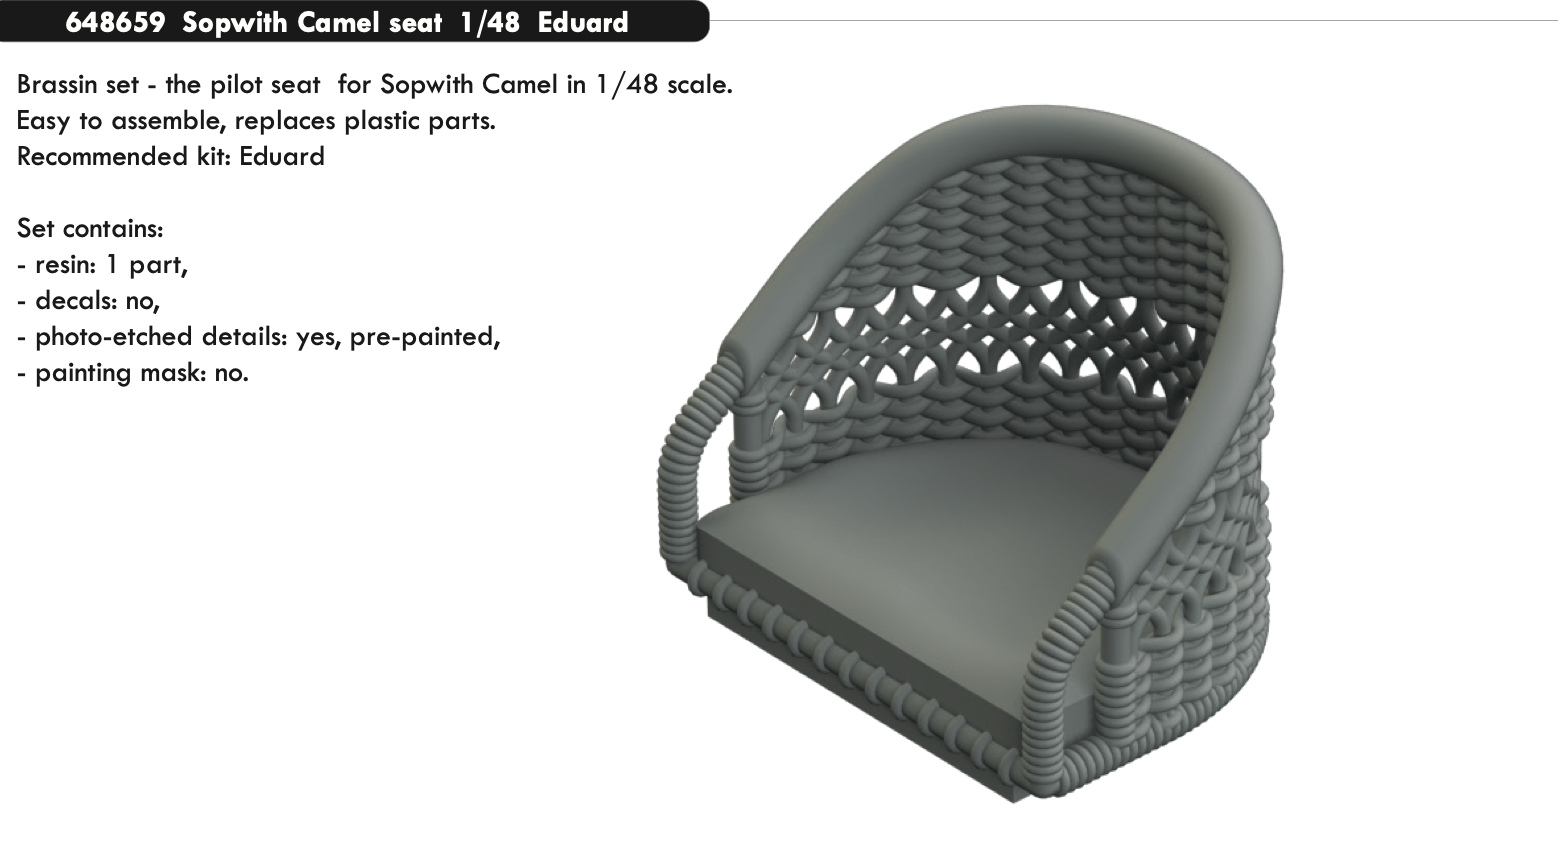 Additions (3D resin printing) 1/48 Sopwith Camel seat (designed to be used with Eduard kits)